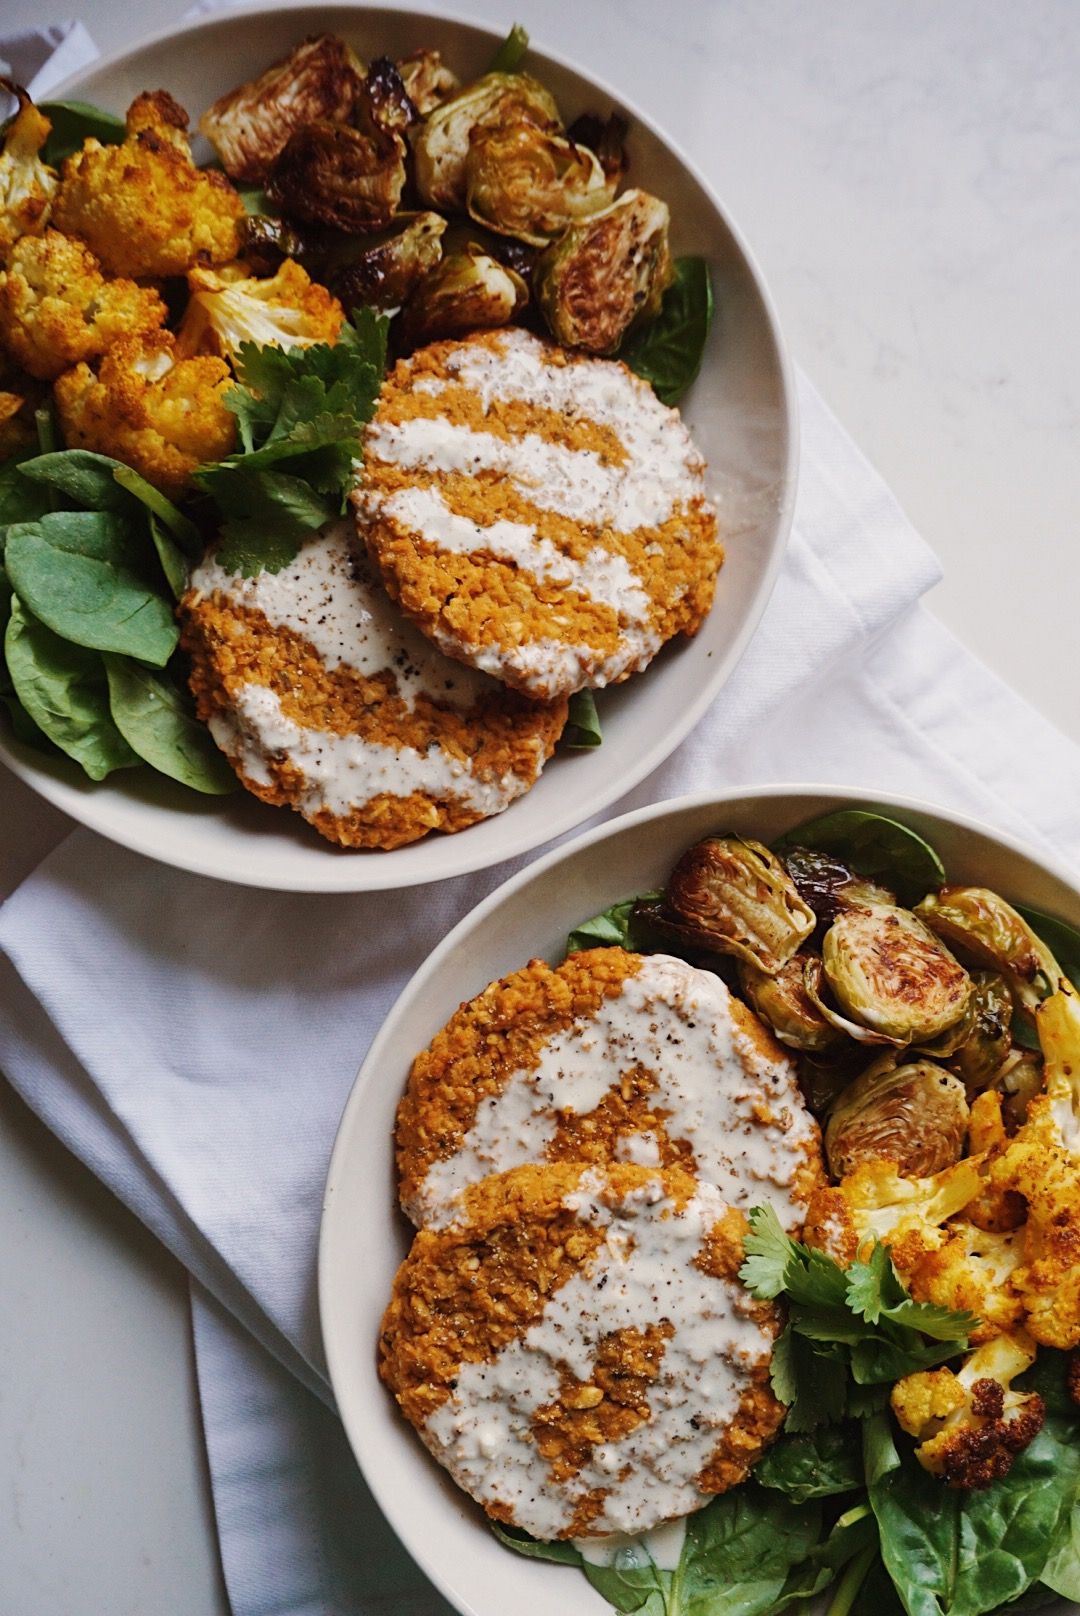 Spicy Red Lentil Burgers - J.C.'s Quality Foods